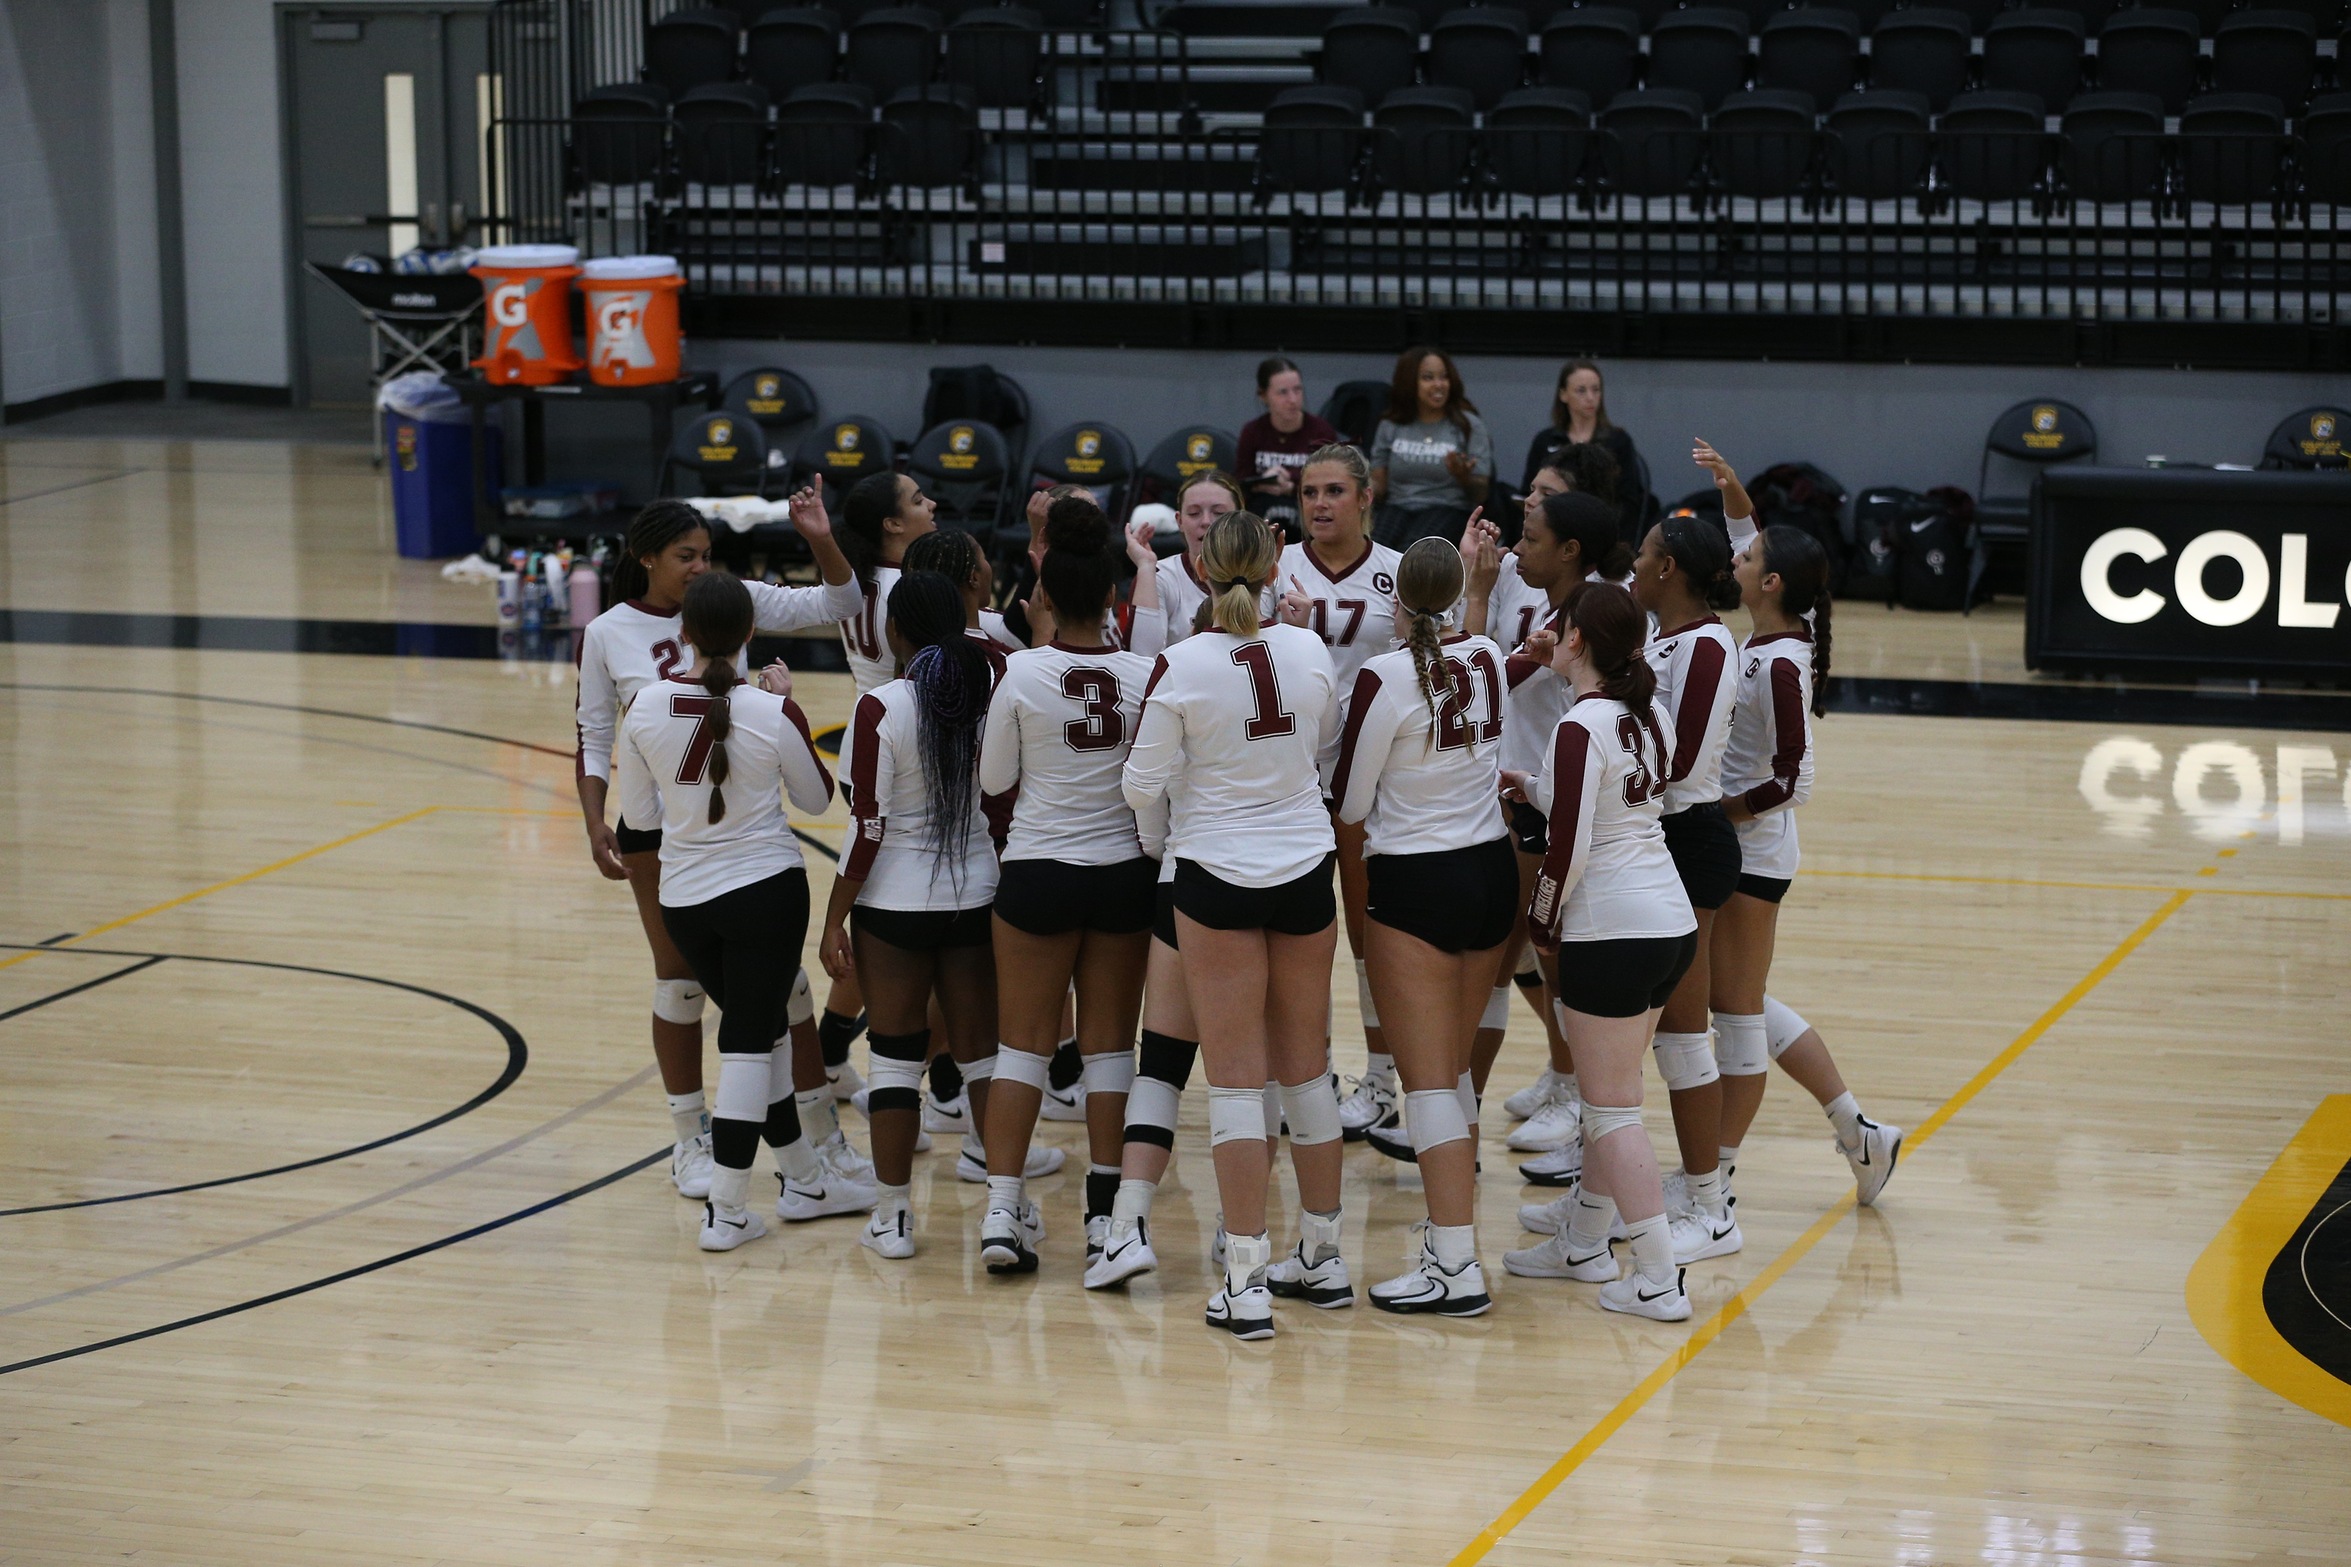 The Ladies recorded a sweep over Williams Baptist on Saturday at home.